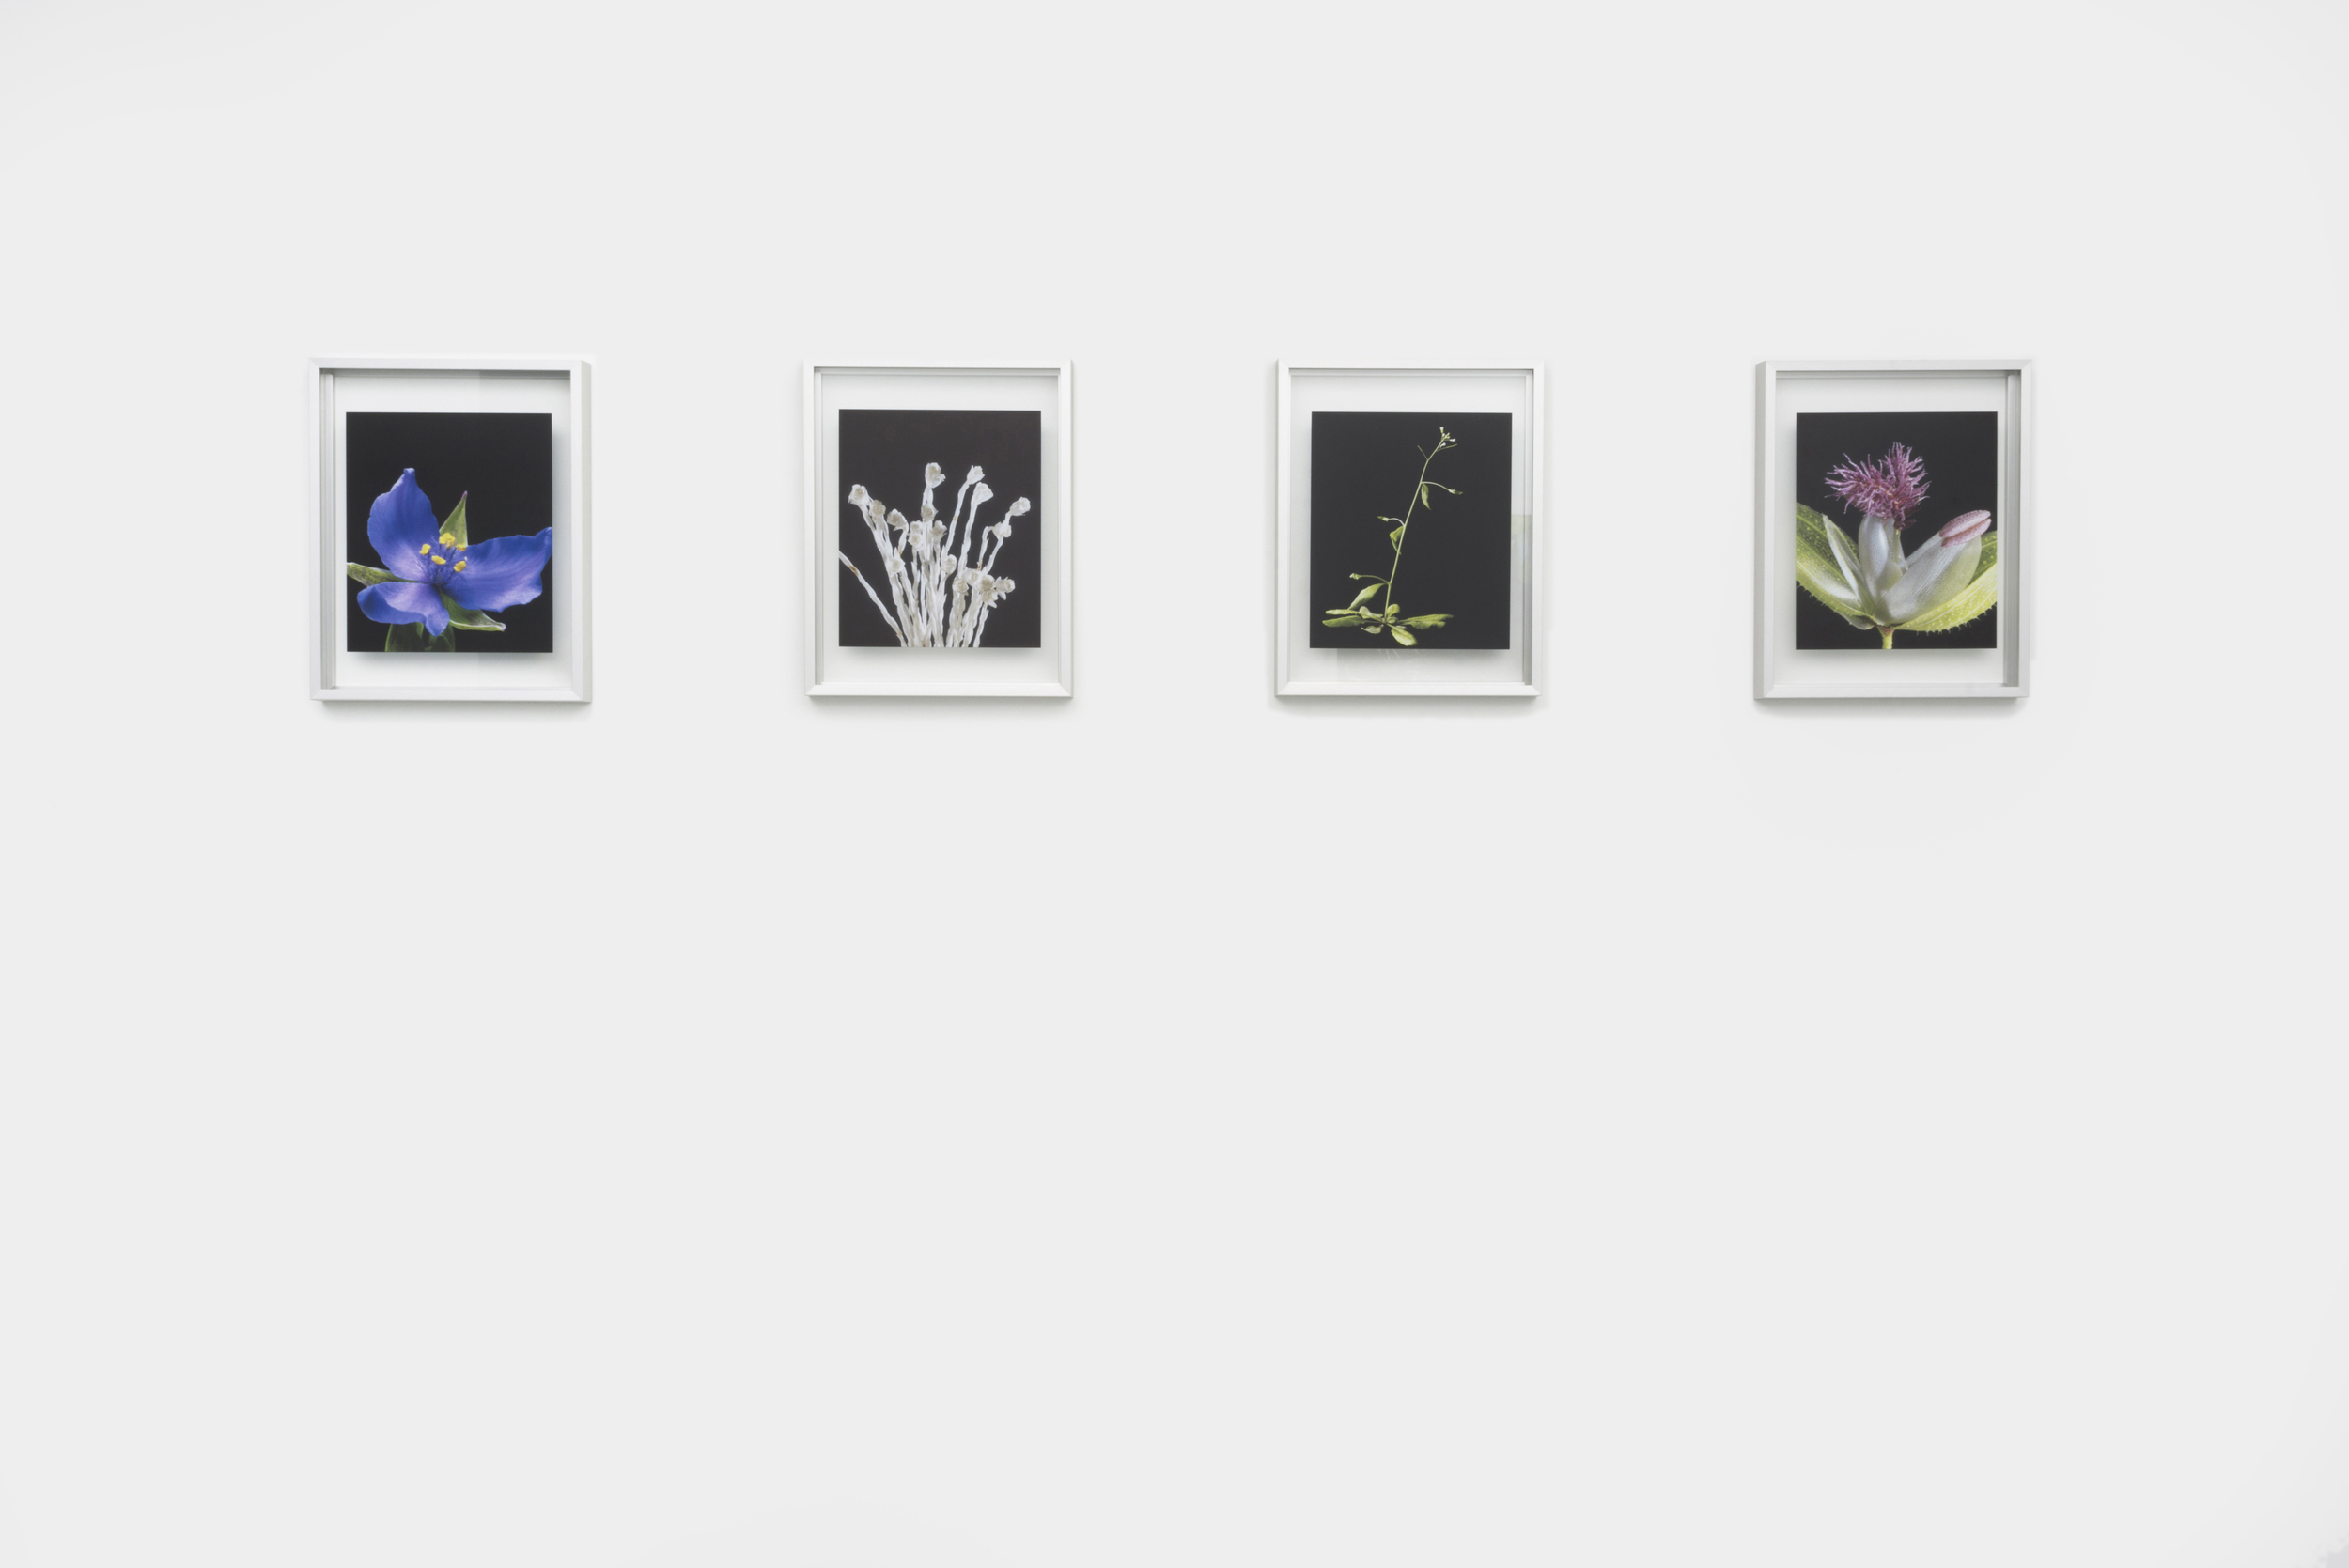  To Threptikon, 2014. Pigment prints on glass. Edition of 3 + 2APs 4 parts, 14 x 11 inches each&nbsp; 